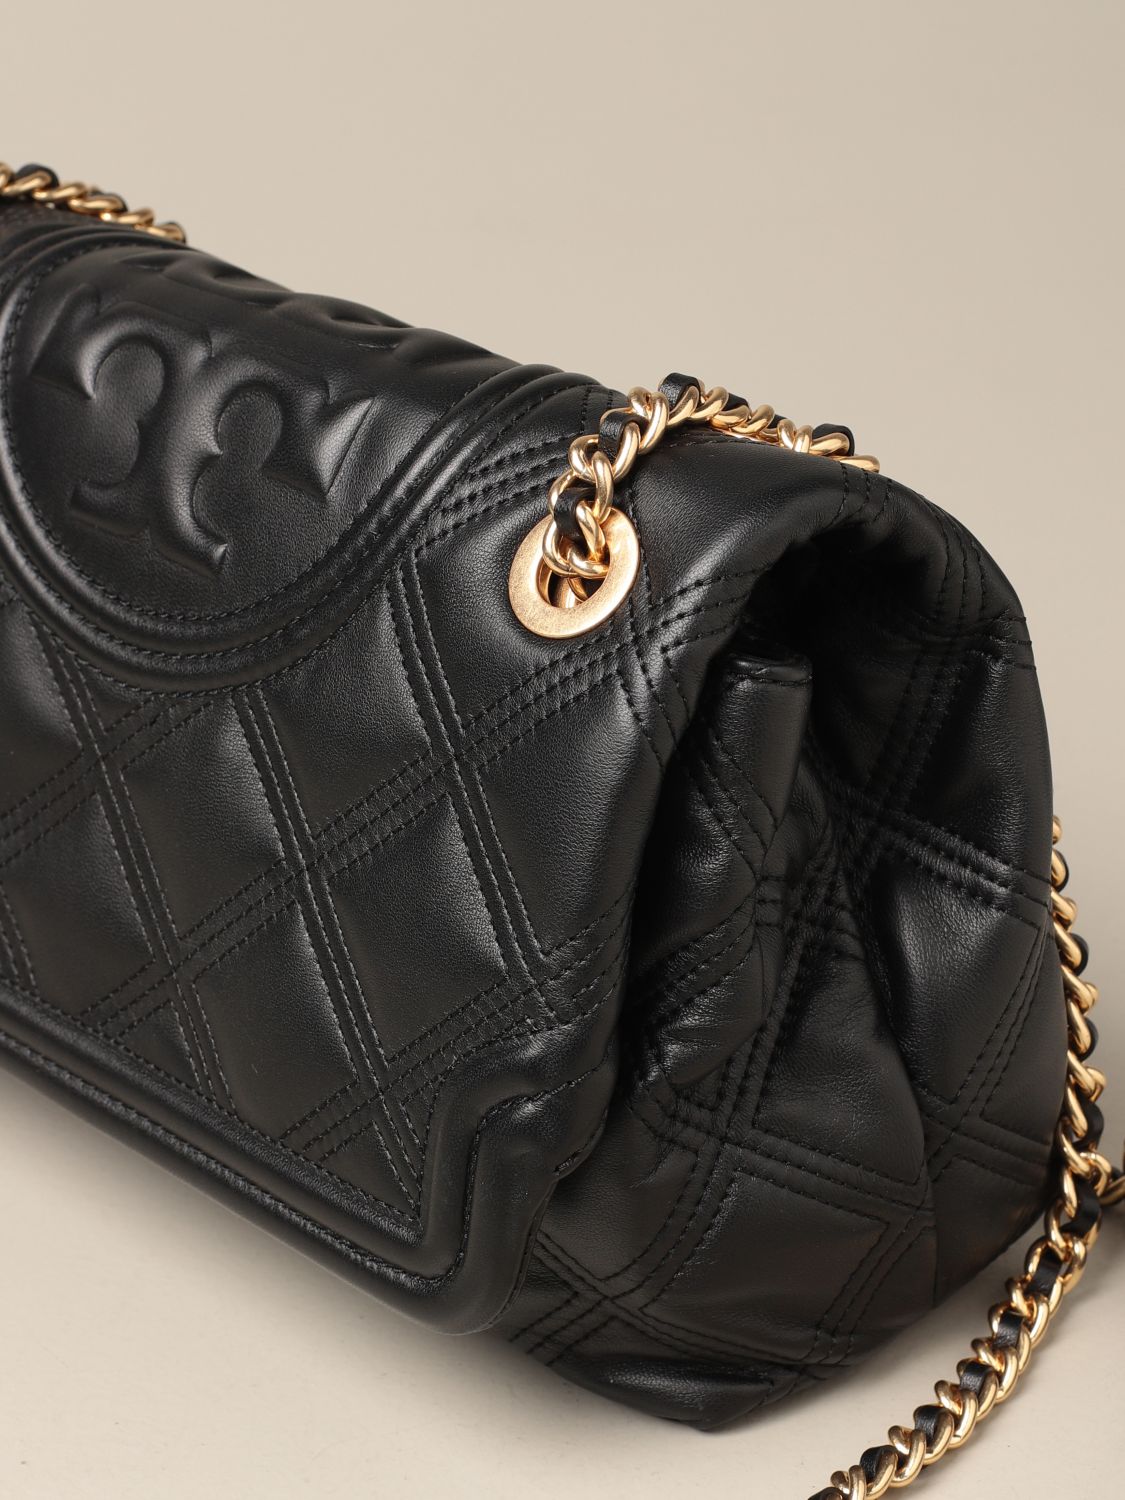 TORY BURCH: Fleming Soft bag in quilted leather | Crossbody Bags Tory ...